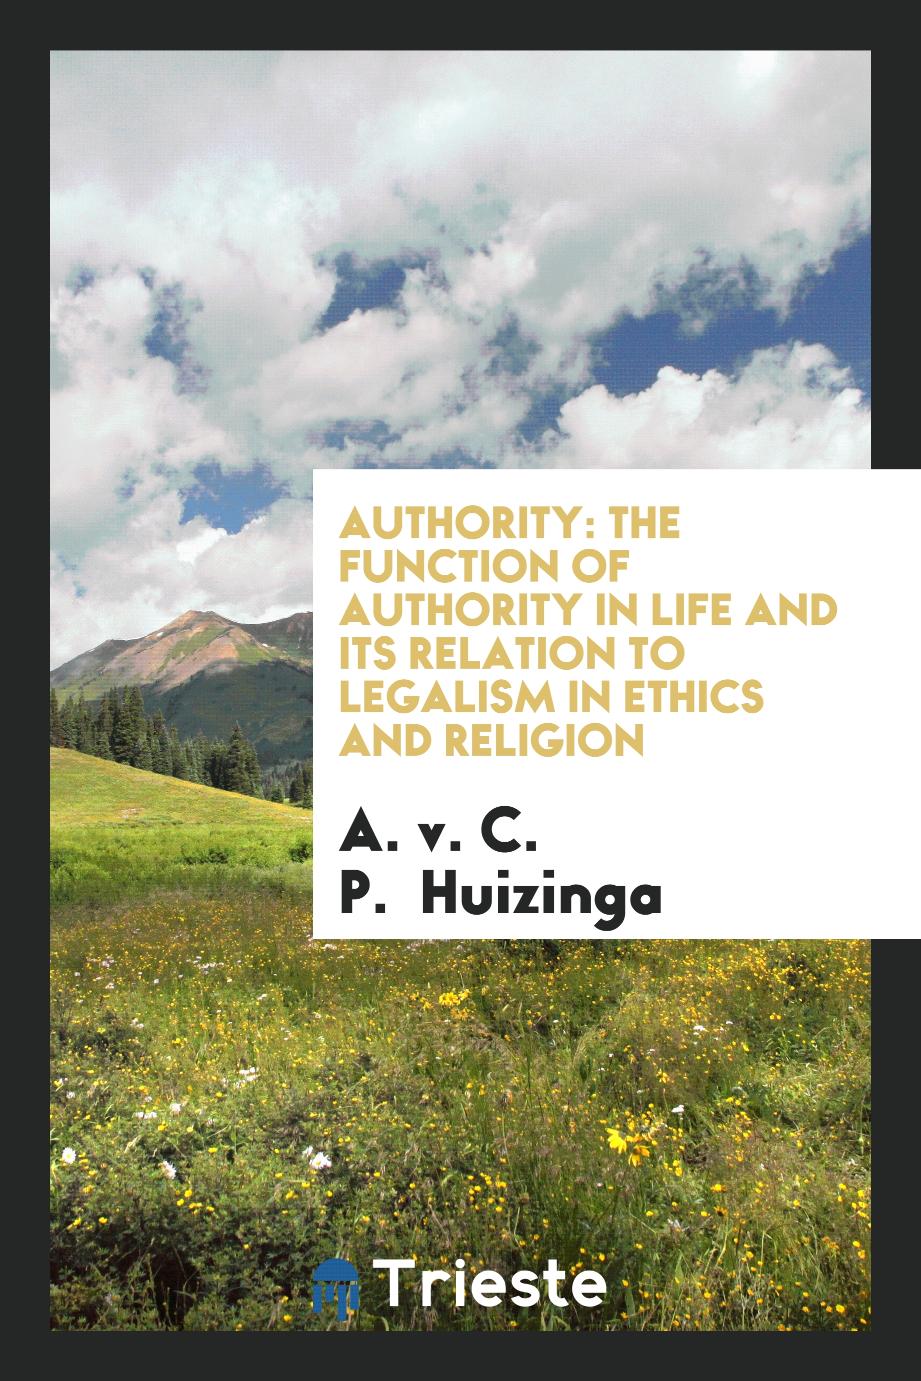 Authority: The Function of Authority in Life and Its Relation to Legalism in Ethics and Religion